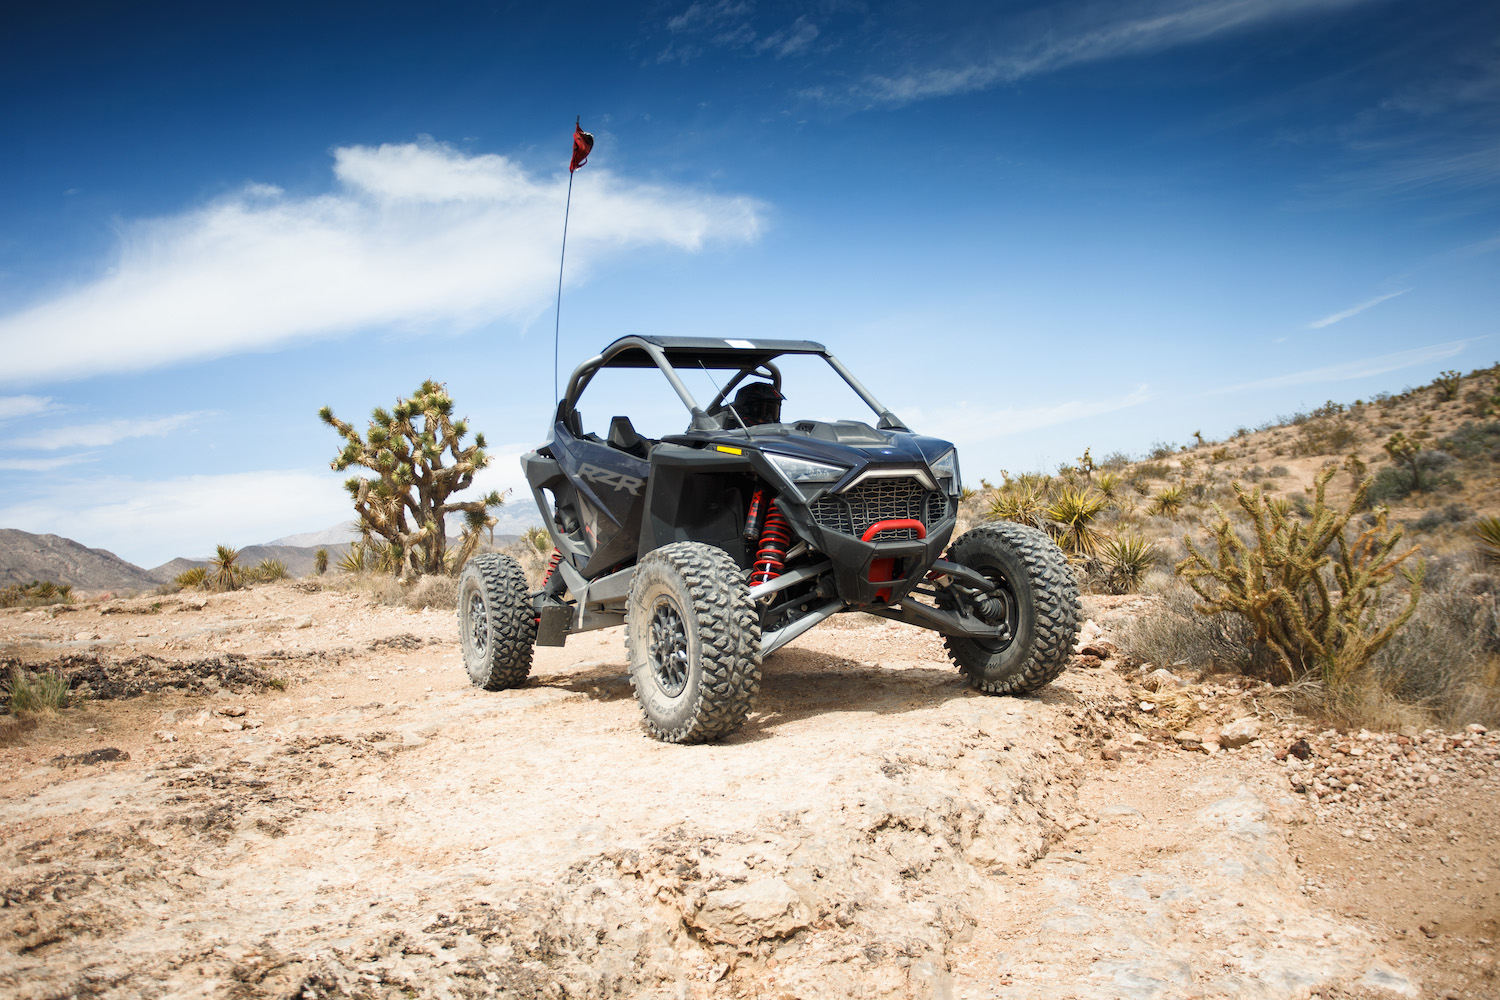 Polaris RZR Pro R front end driving on a dirt path in the desert with cactus in the background.